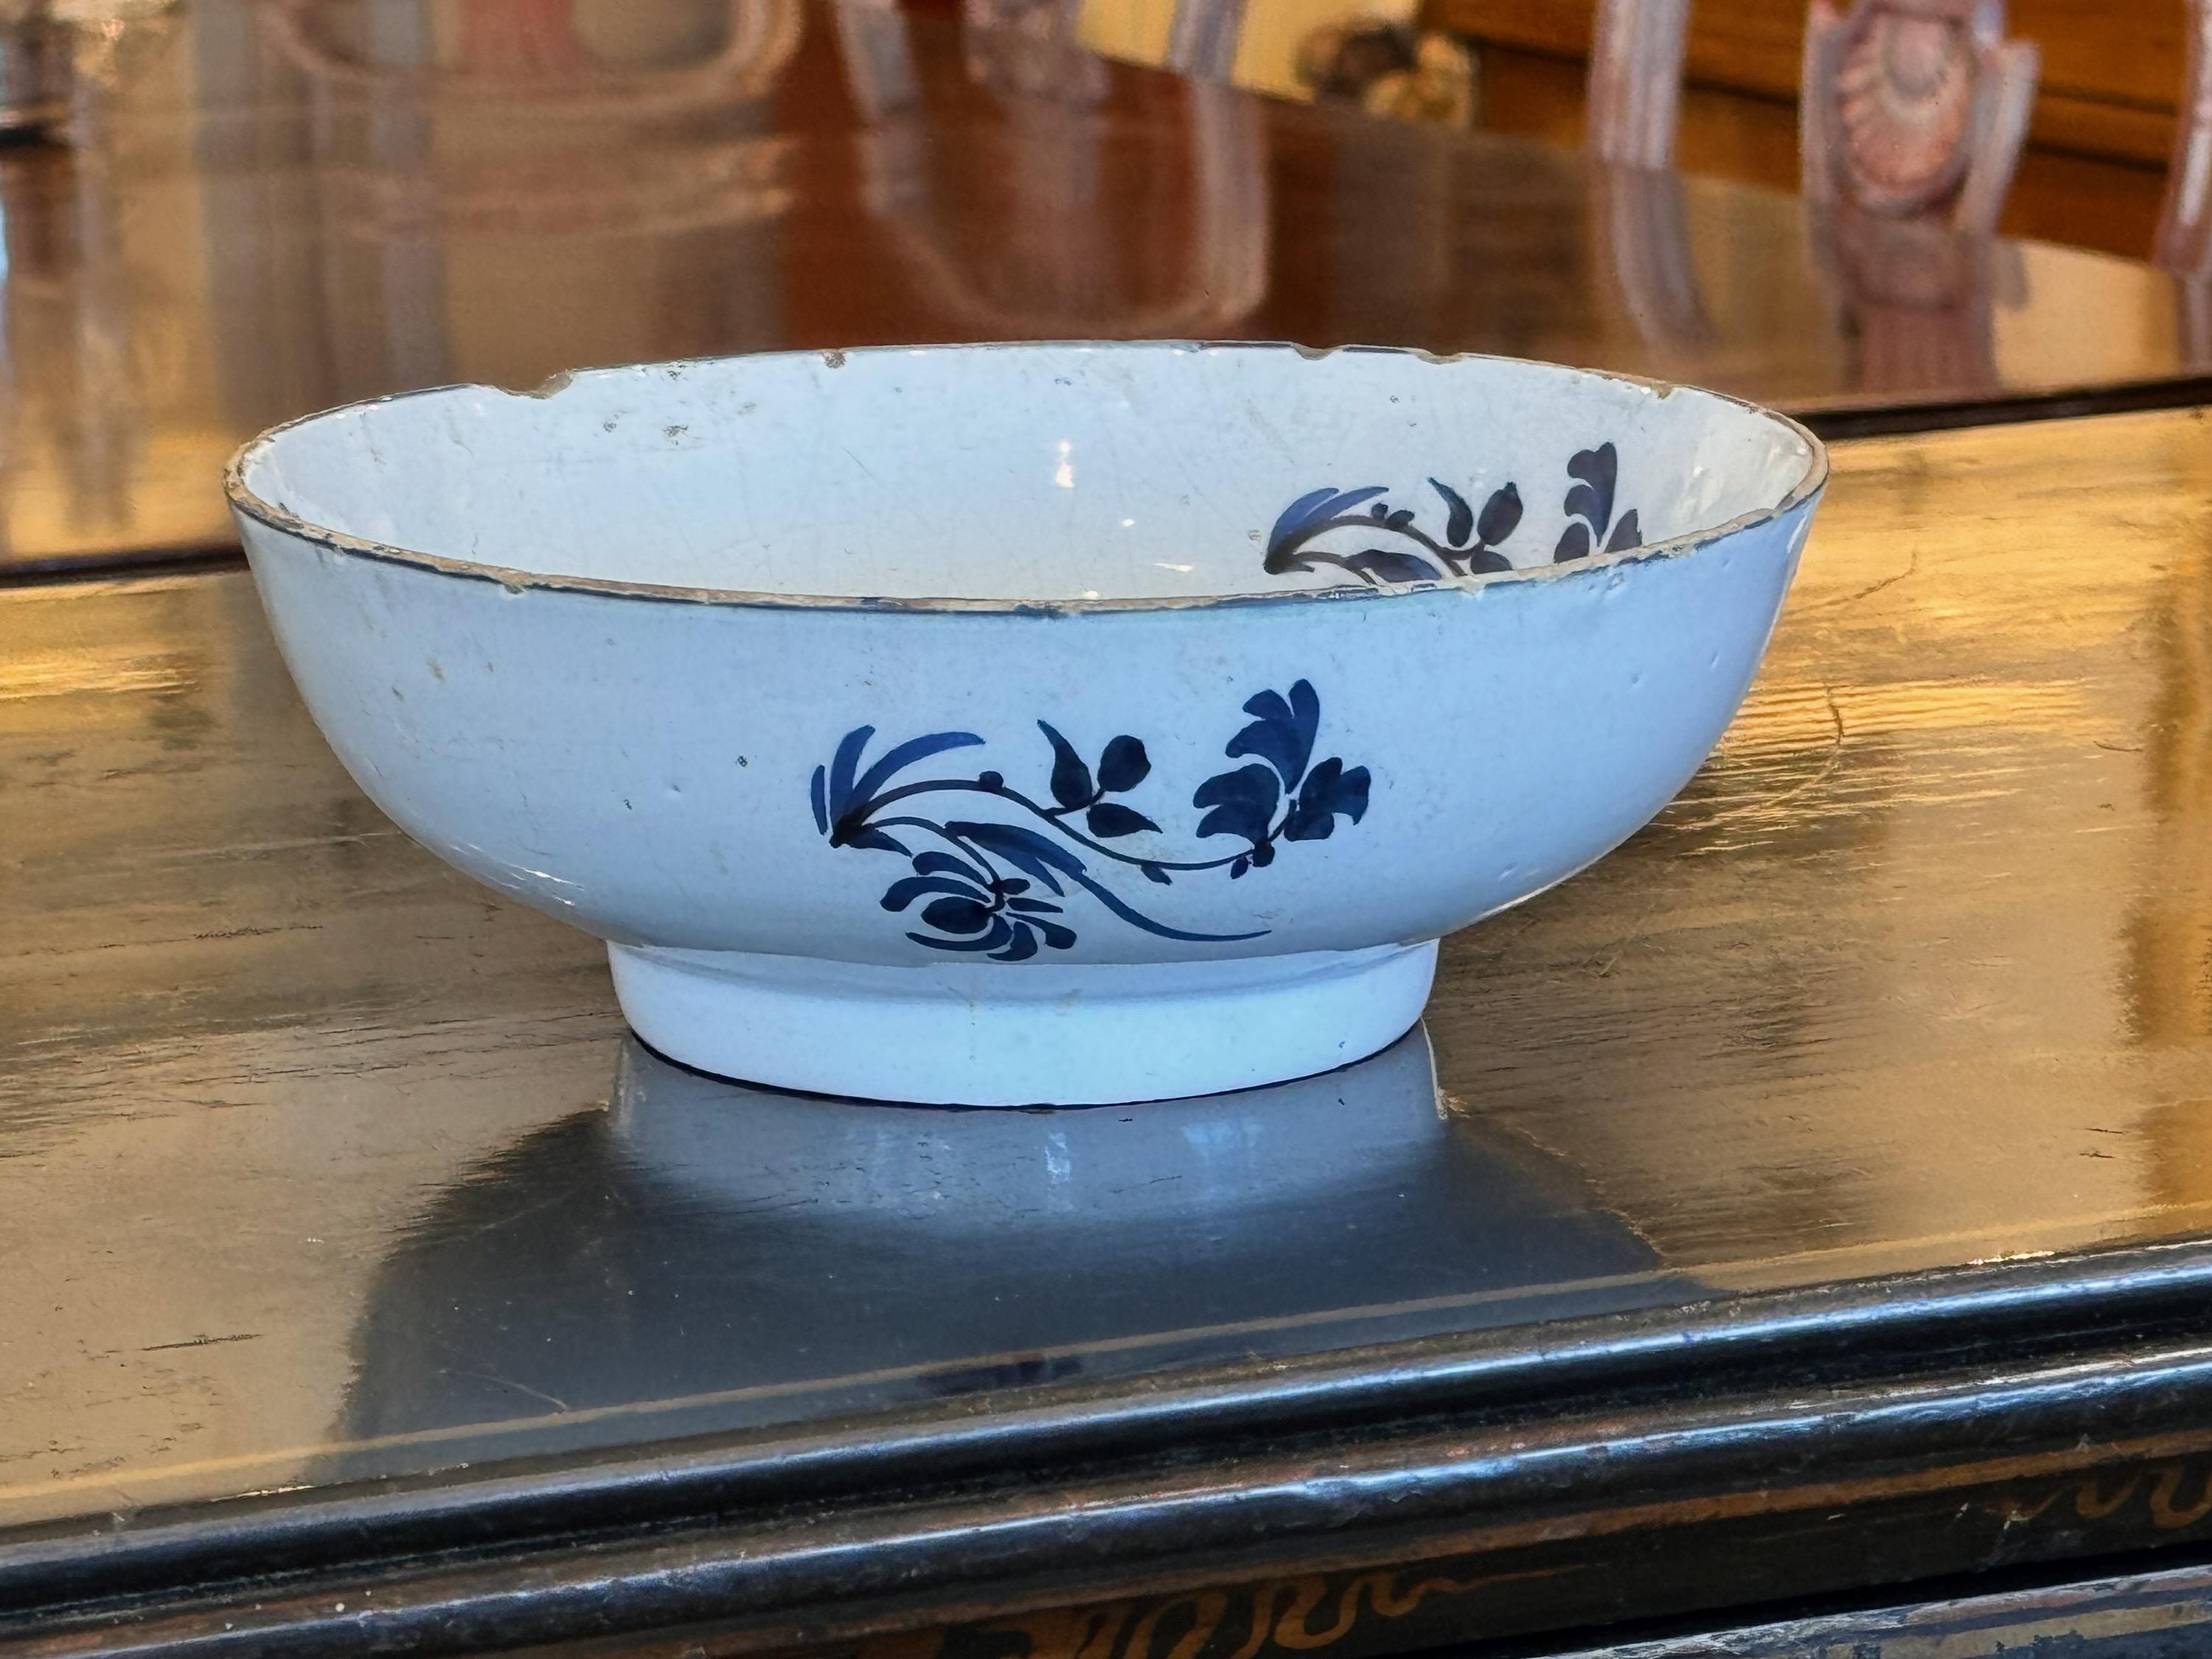 A blue and white delft bowl. Lots of charm.